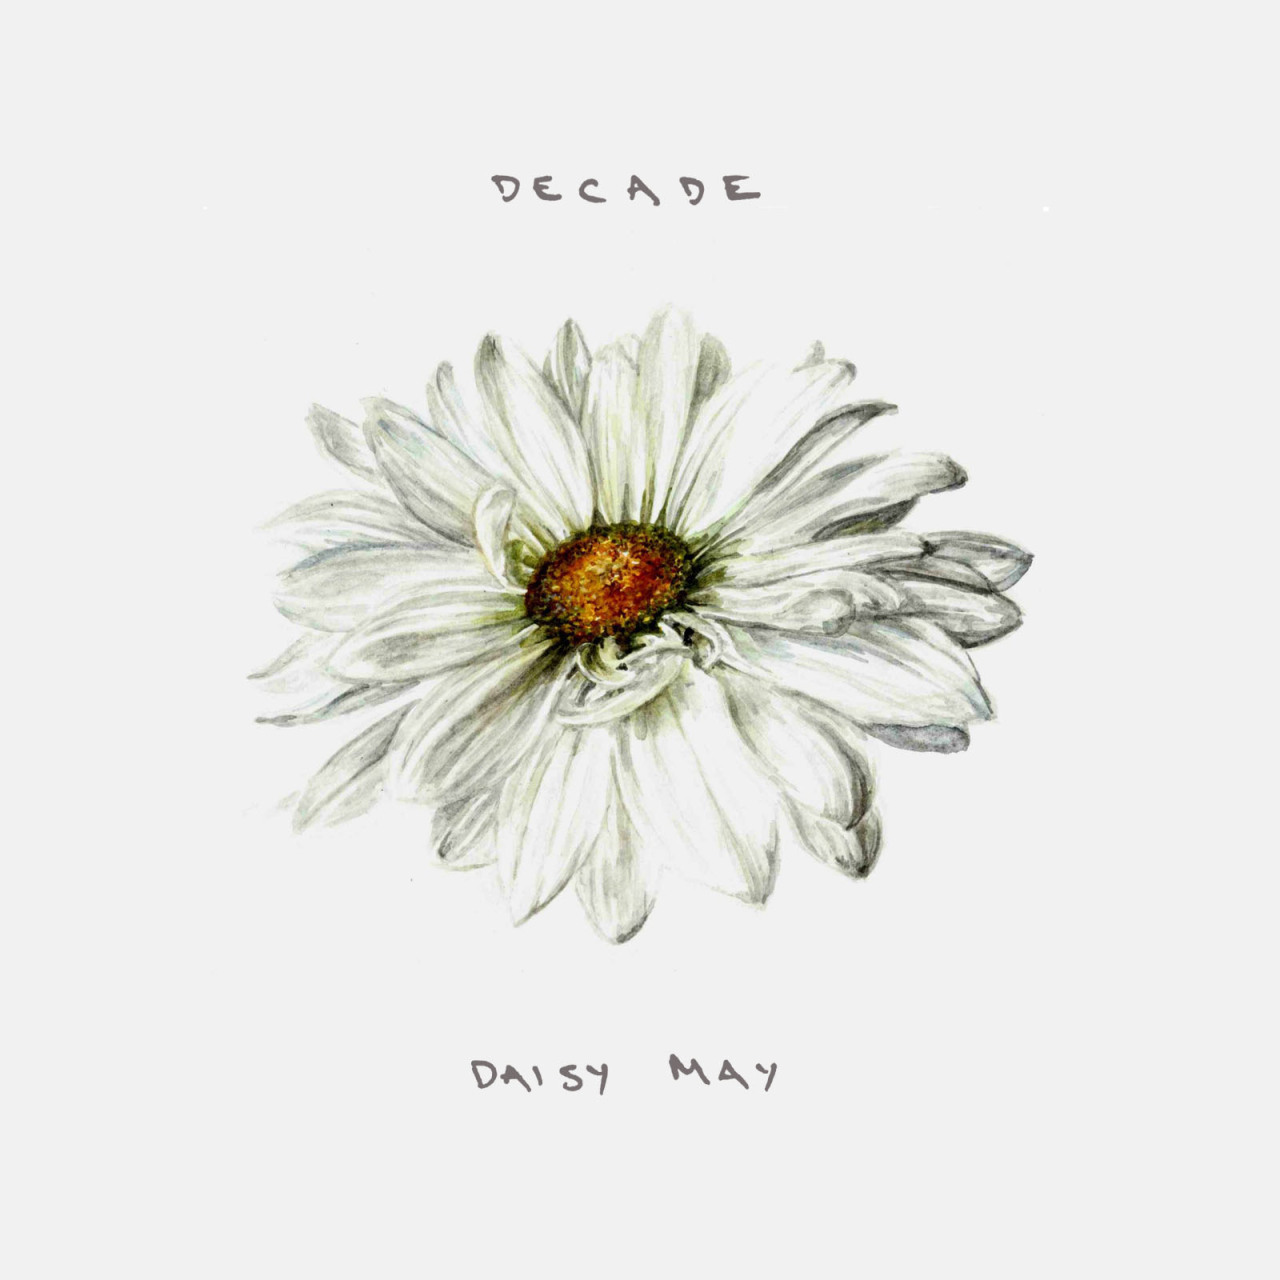 New single ‘Daisy May’ available on iTunes now:https://t.co/9zqguQWZiu